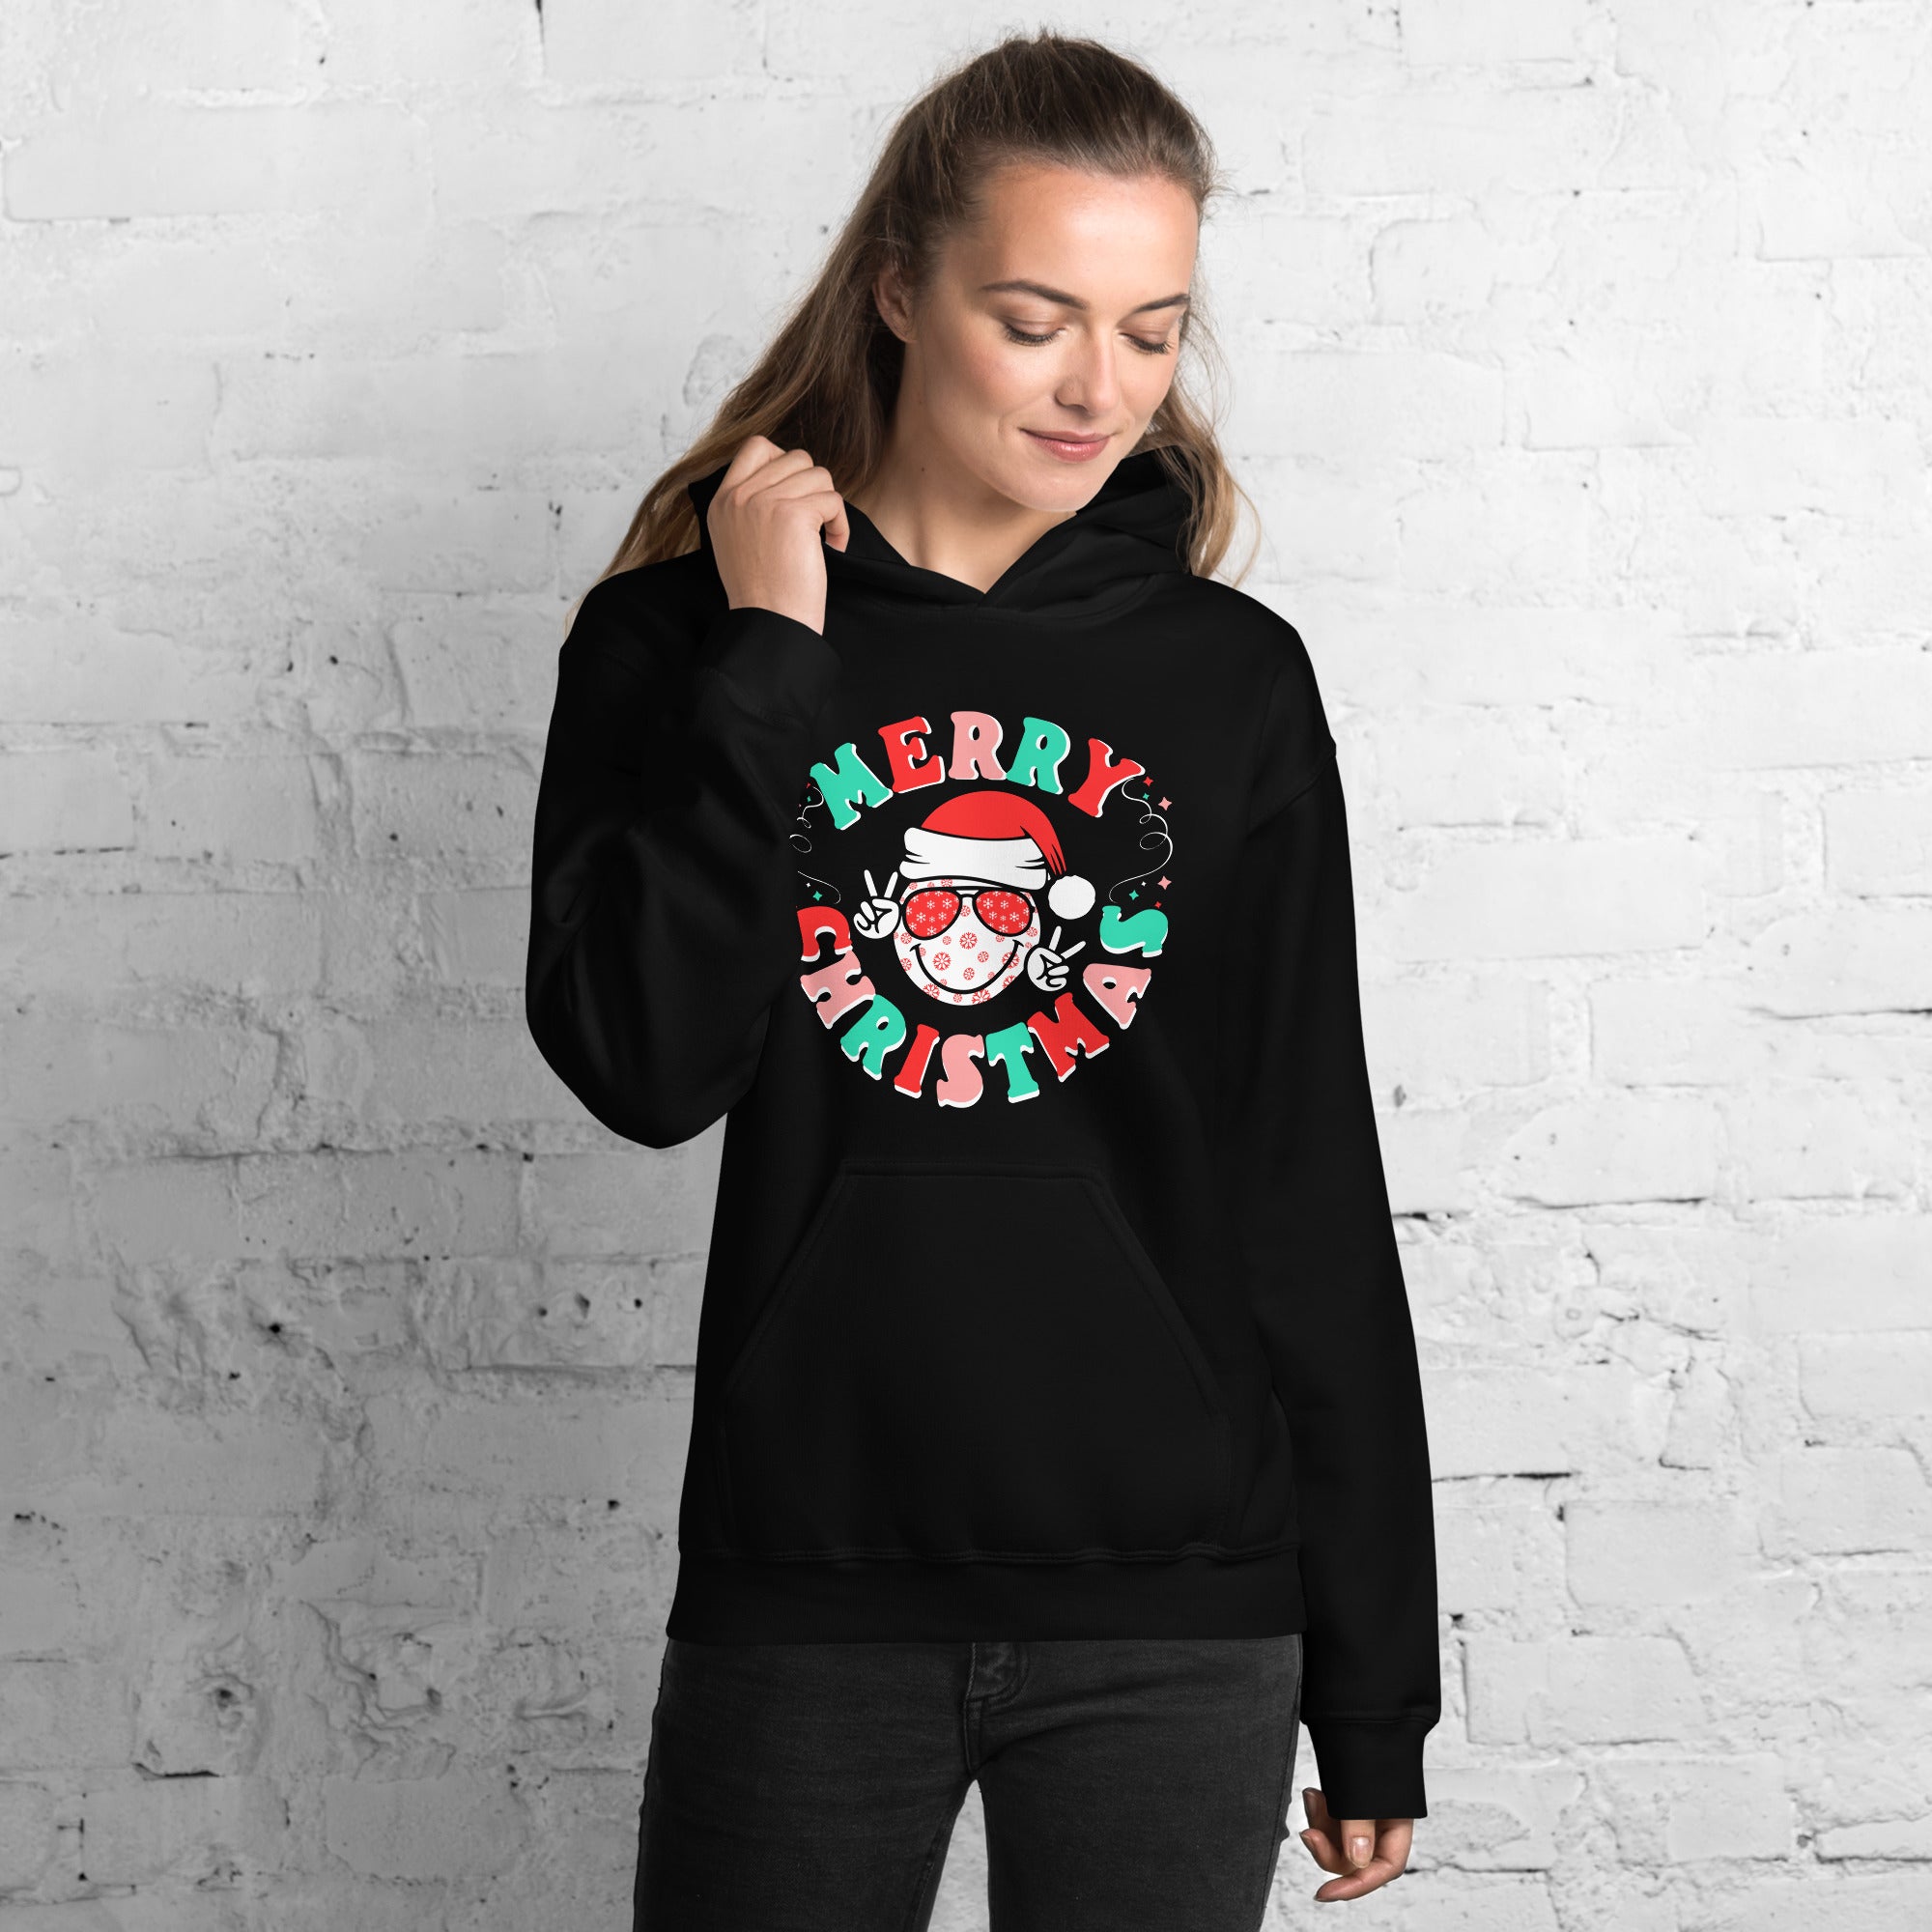 Merry Christmas Smiley With Peace Signs Women's Hoodie Retro Santa Peace Smiley Xmas Women's Hoodie